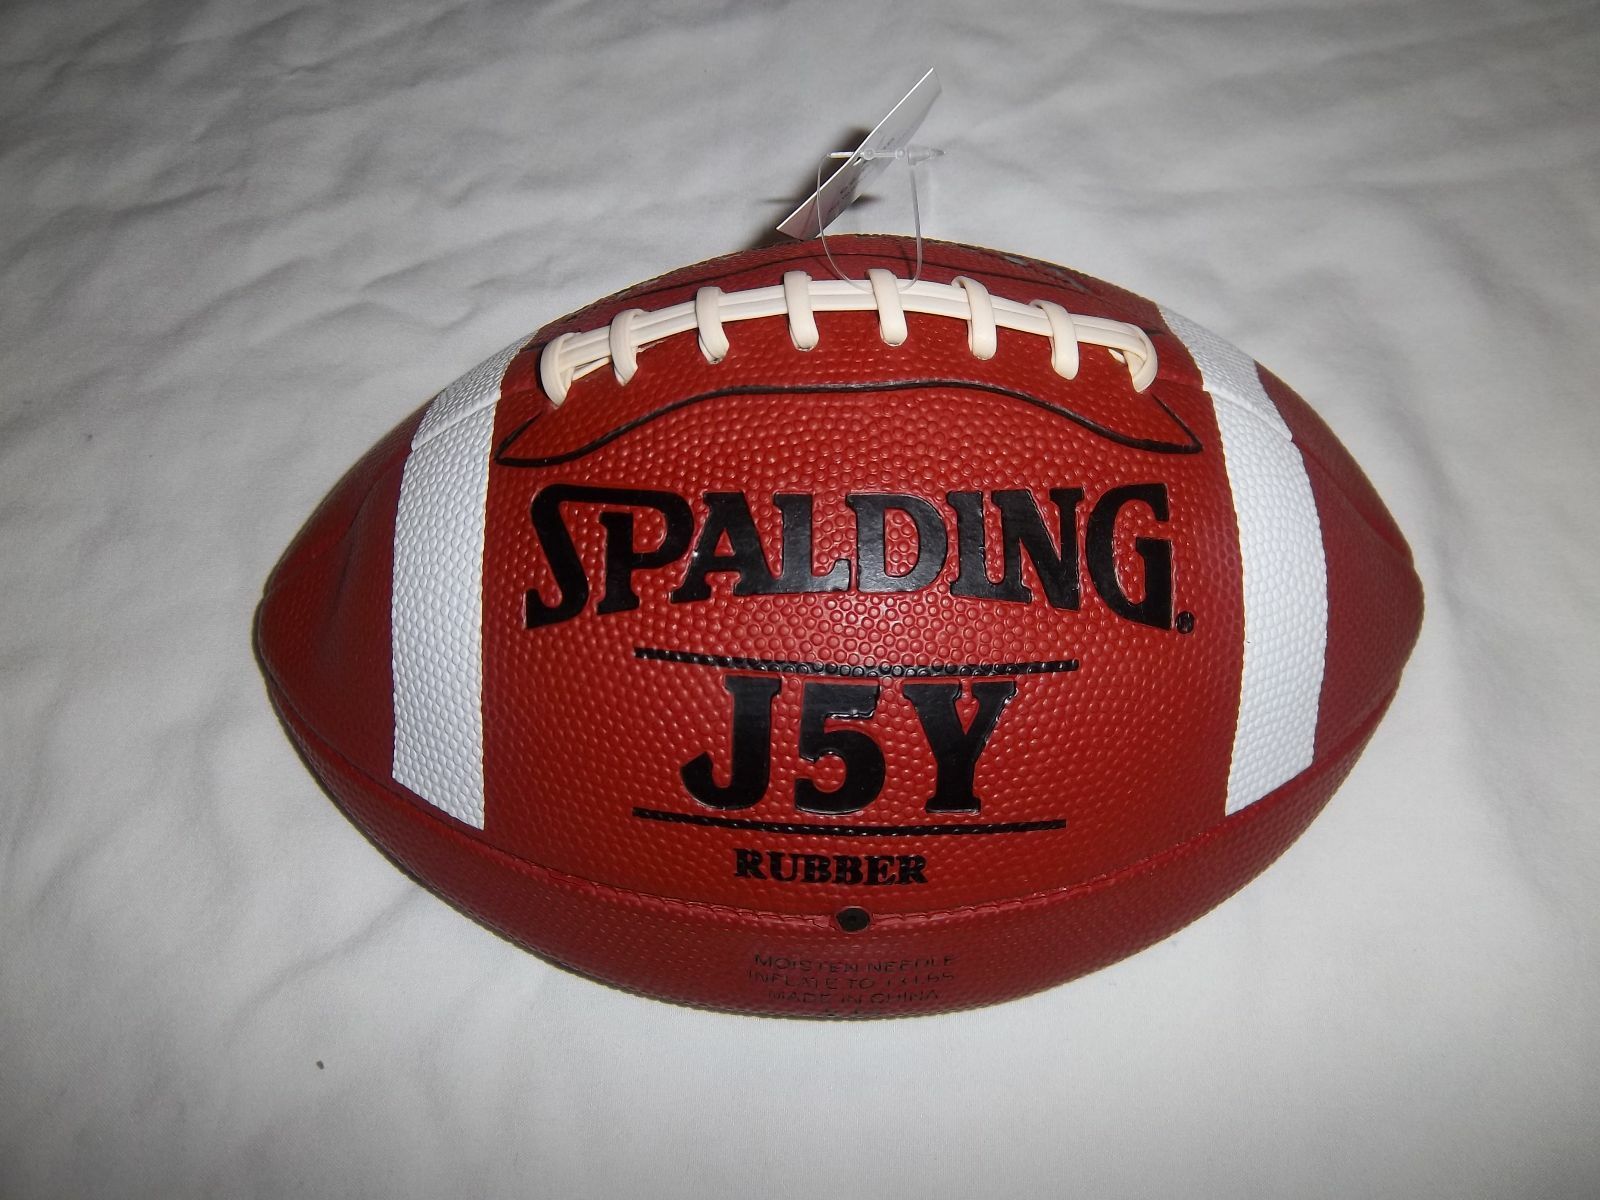 SPALDING J5Y YOUTH RUBBER FOOTBALL